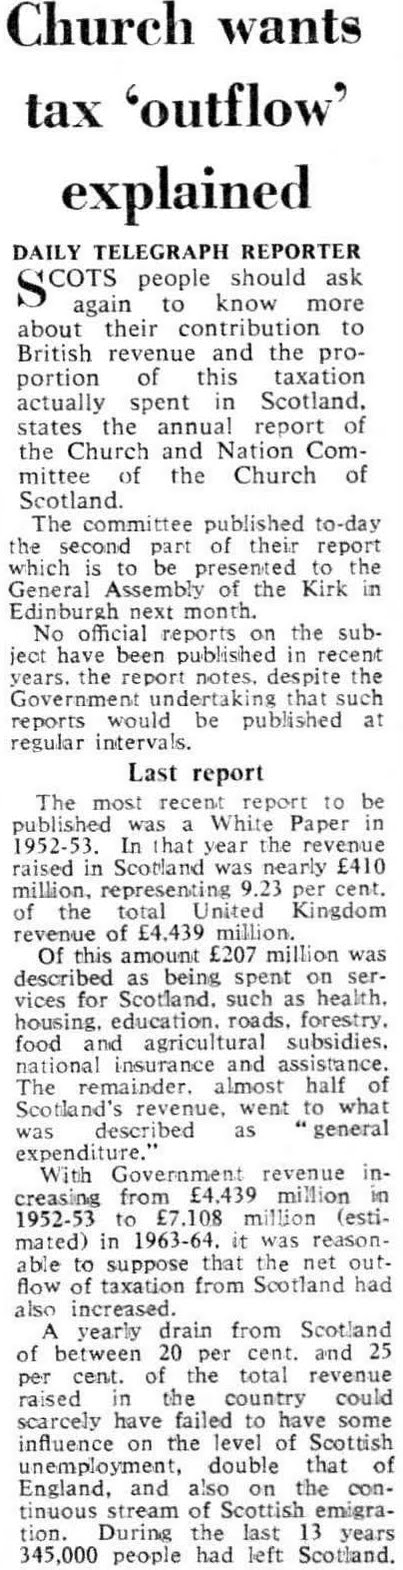 Tax Drain from Scotland, The Daily Telegraph, 1964